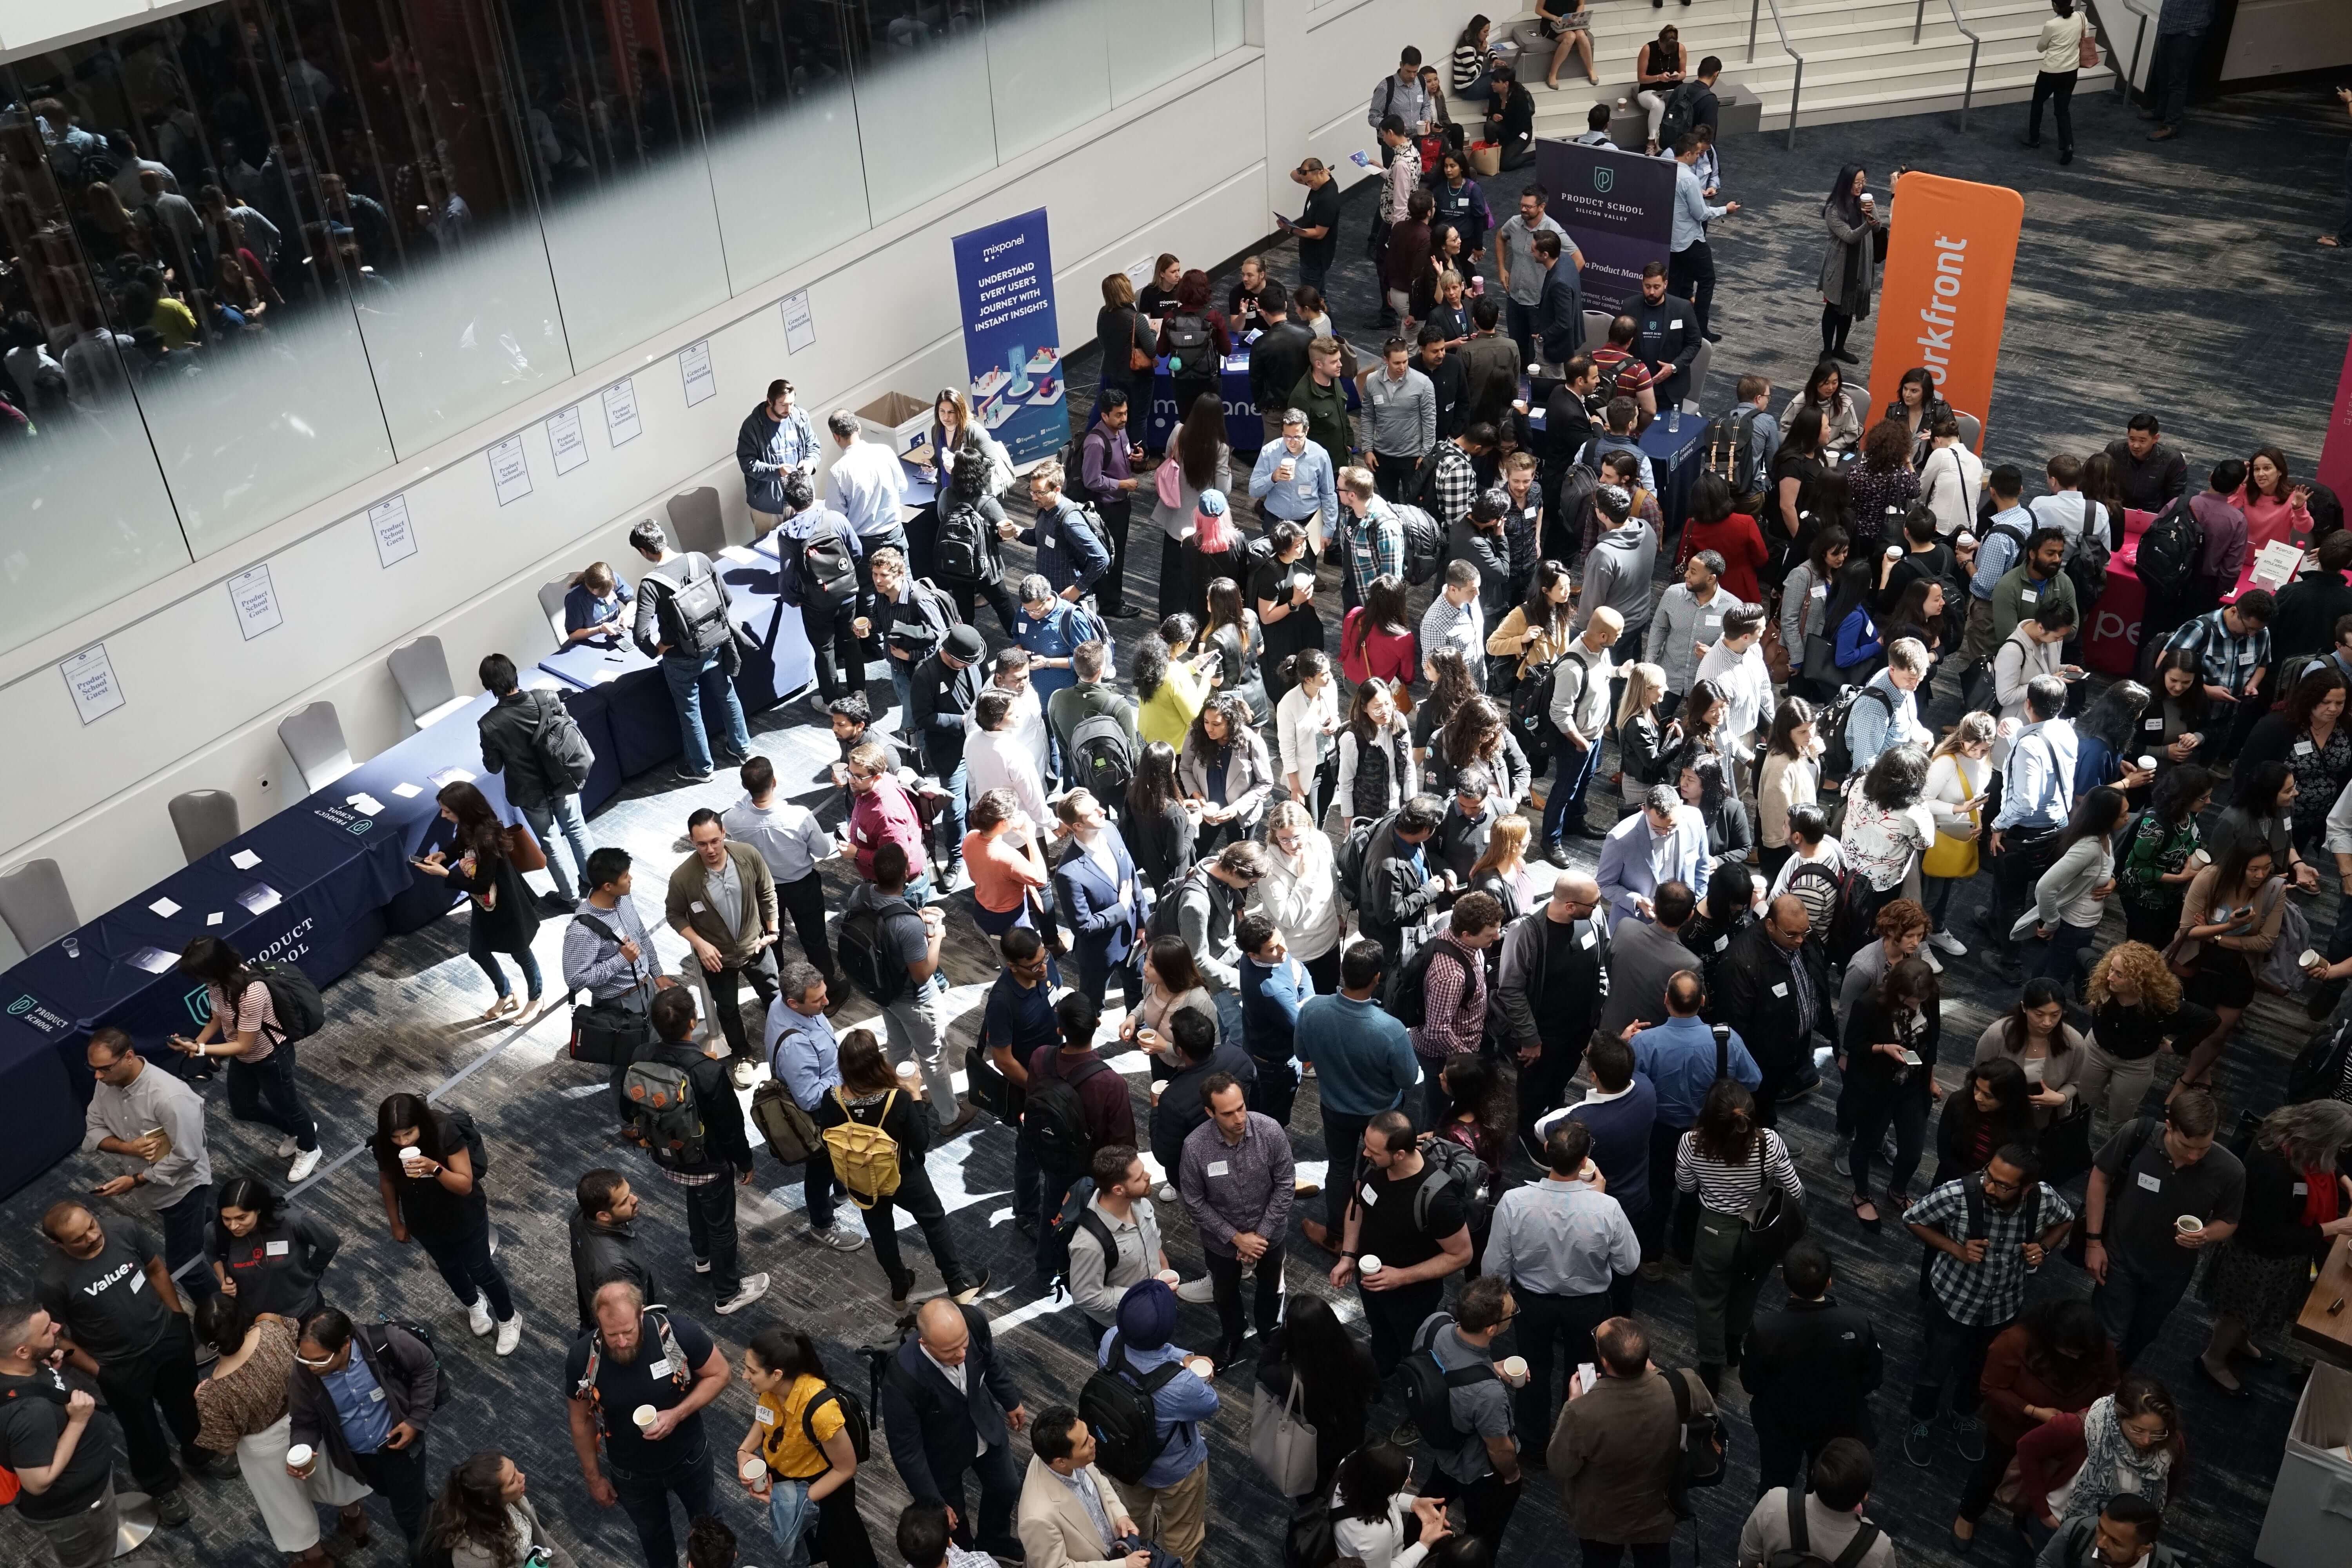 image of attendees mingling at a large event